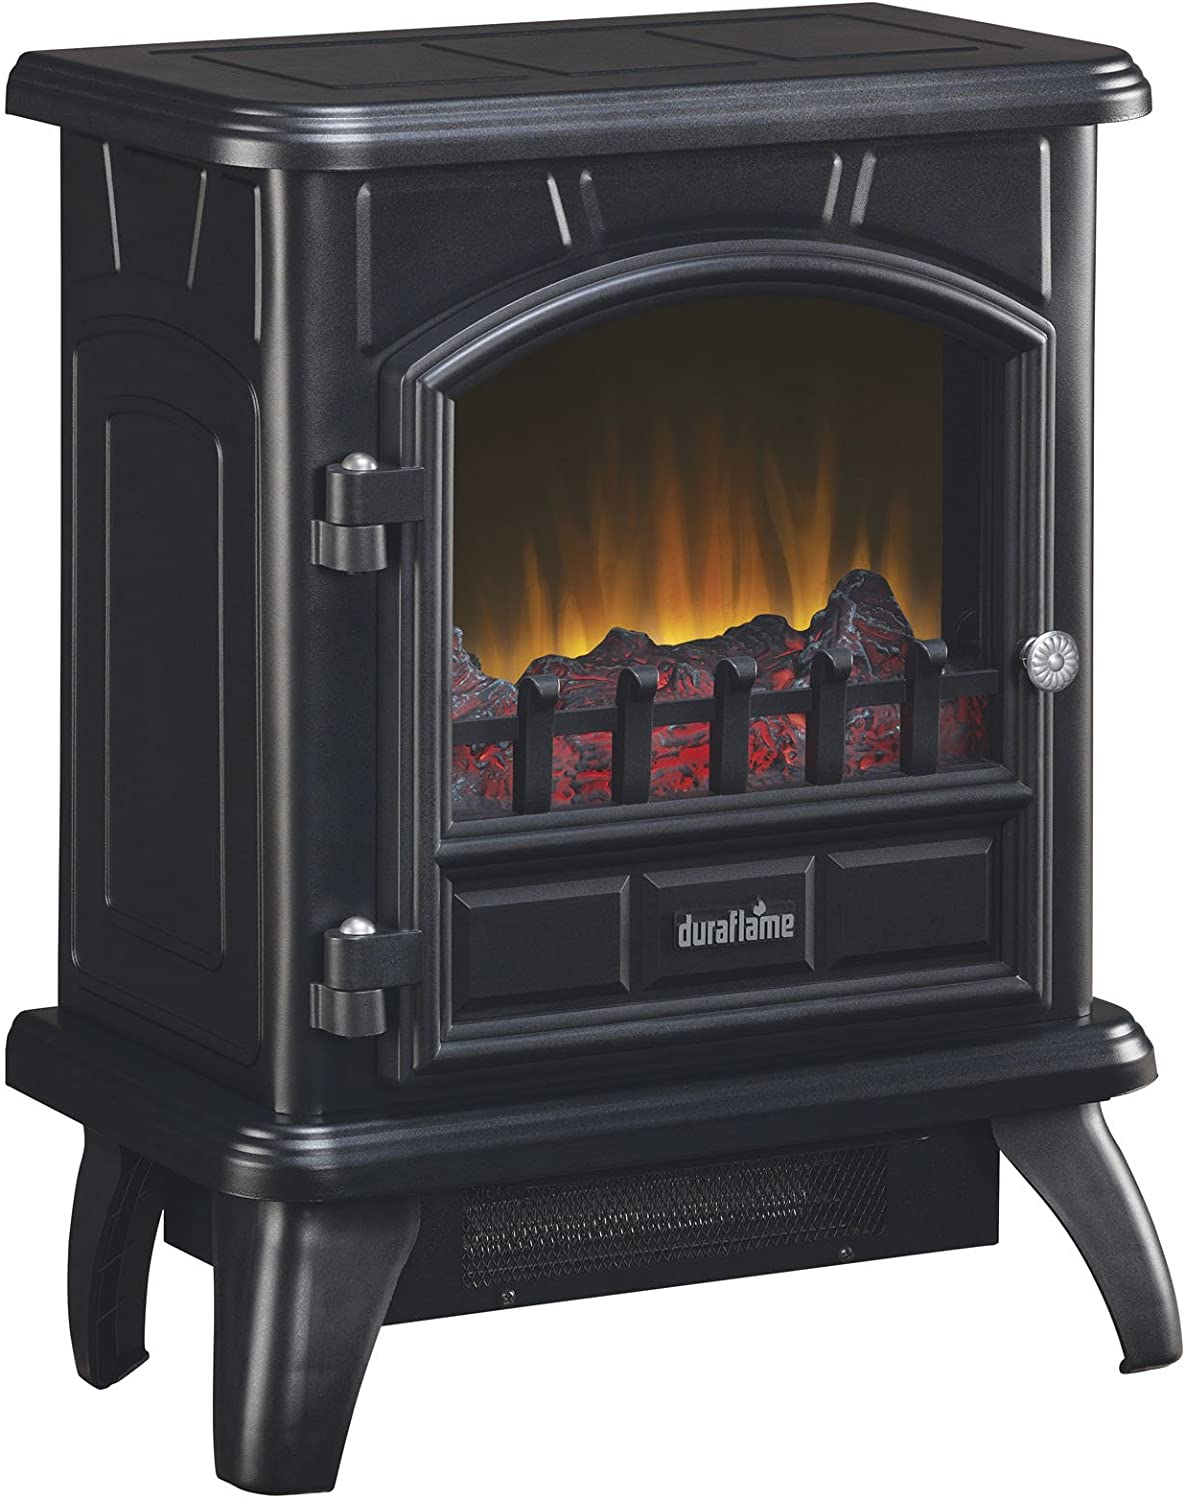 Electric Outdoor Fireplace Unique Duraflame Dfs 500 0 Thomas Electric Stove with Heater Black